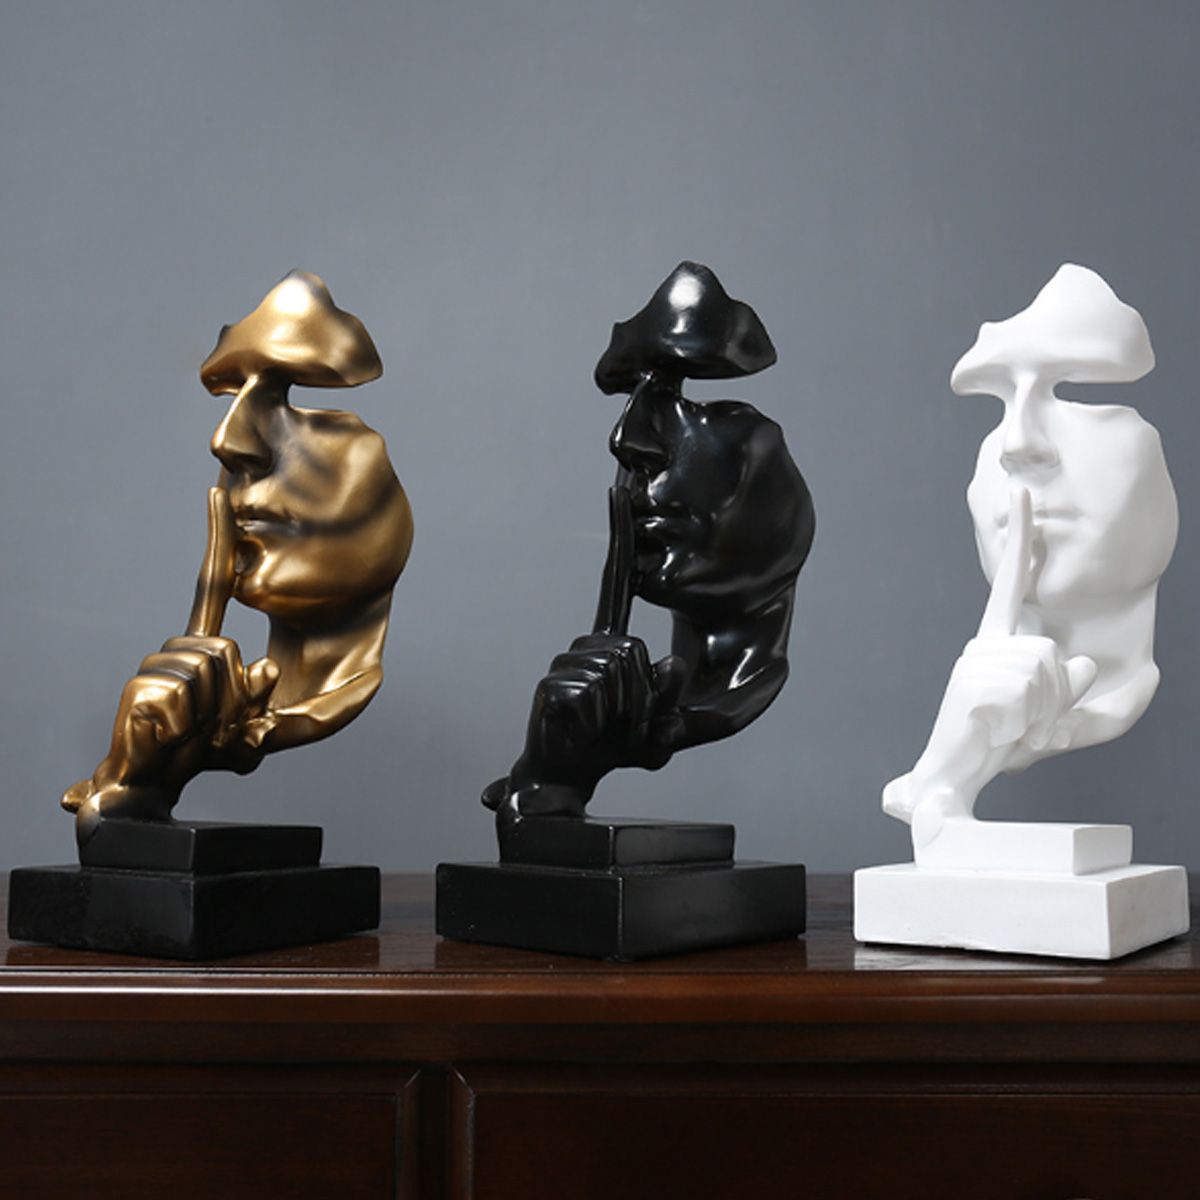 Nordic-Style-Resin-Silent-Decoration-Statues-Gold-Silence-Sculptures-Home-Decorations-1537442